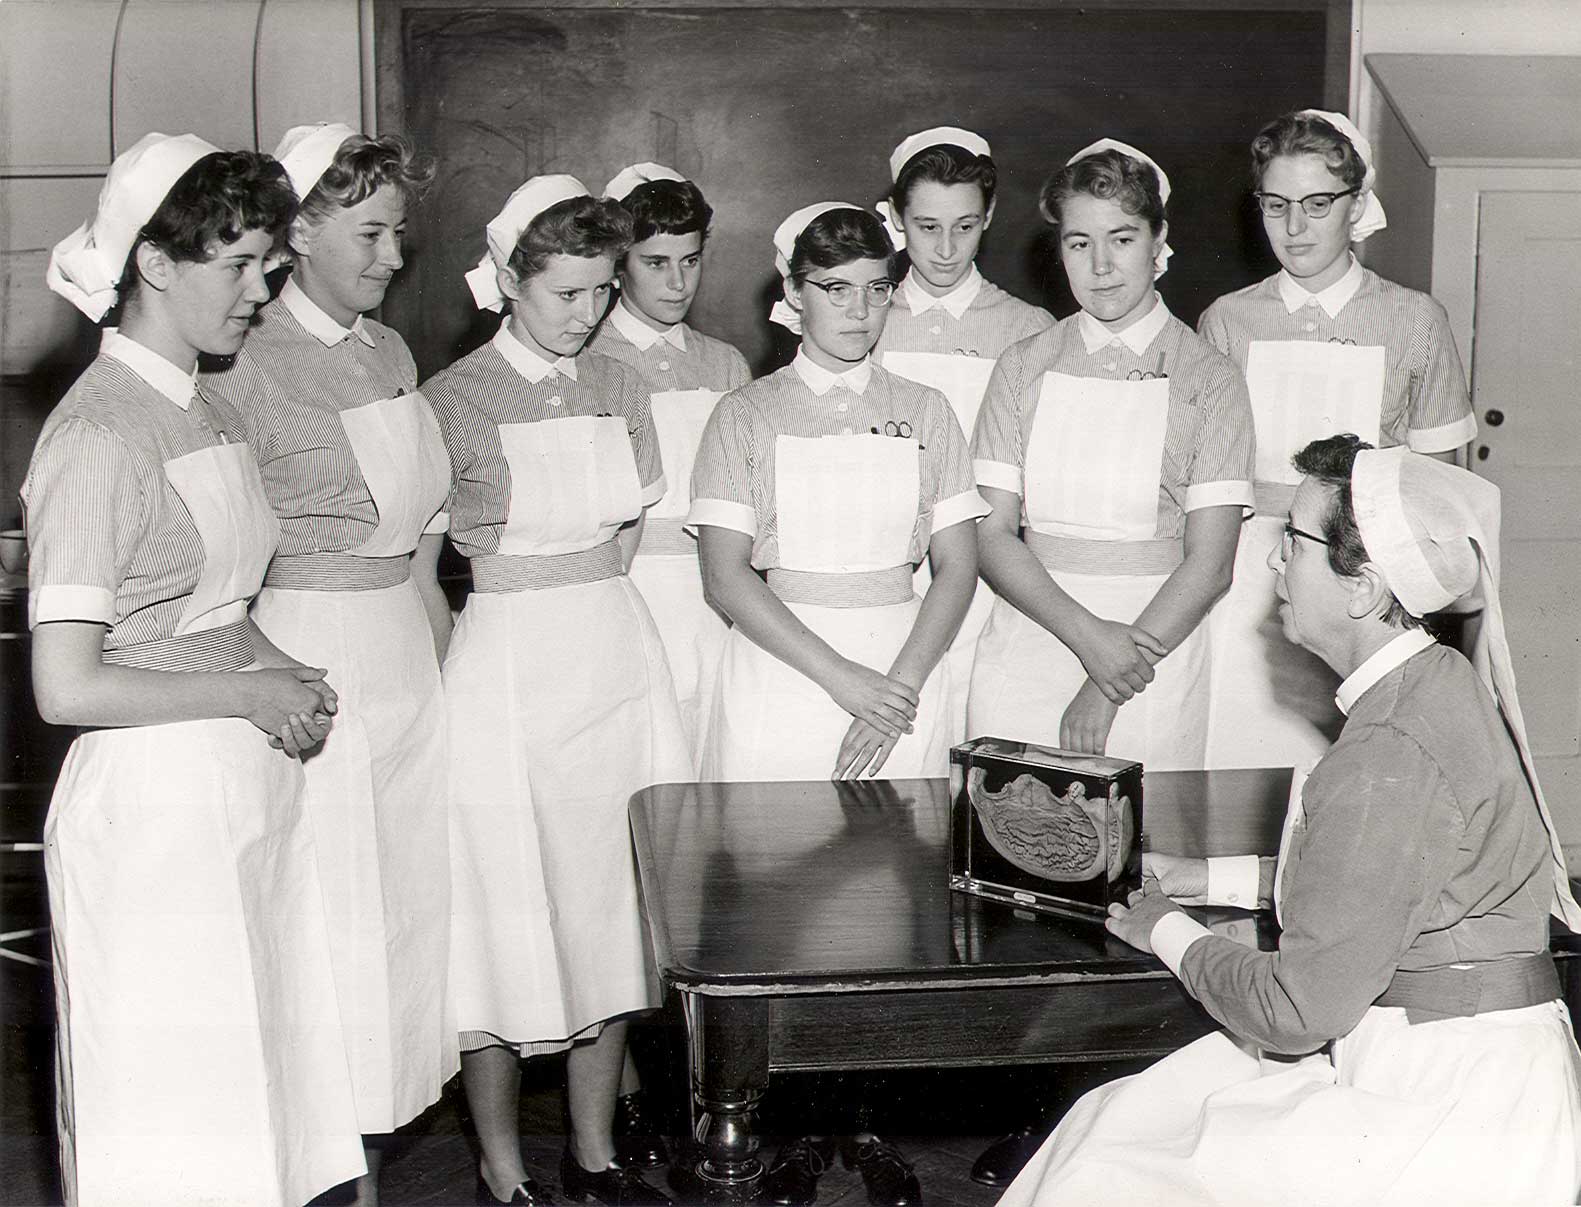 SBHX8/567 "Winifred Hector teaching student nurses in uniform, c.1960. Hector seated at right with gastric specimen on table. Eight second year student nurses [indicated by their belts] standing, from the Oct 1958 set." 1960 Nursing Mirror